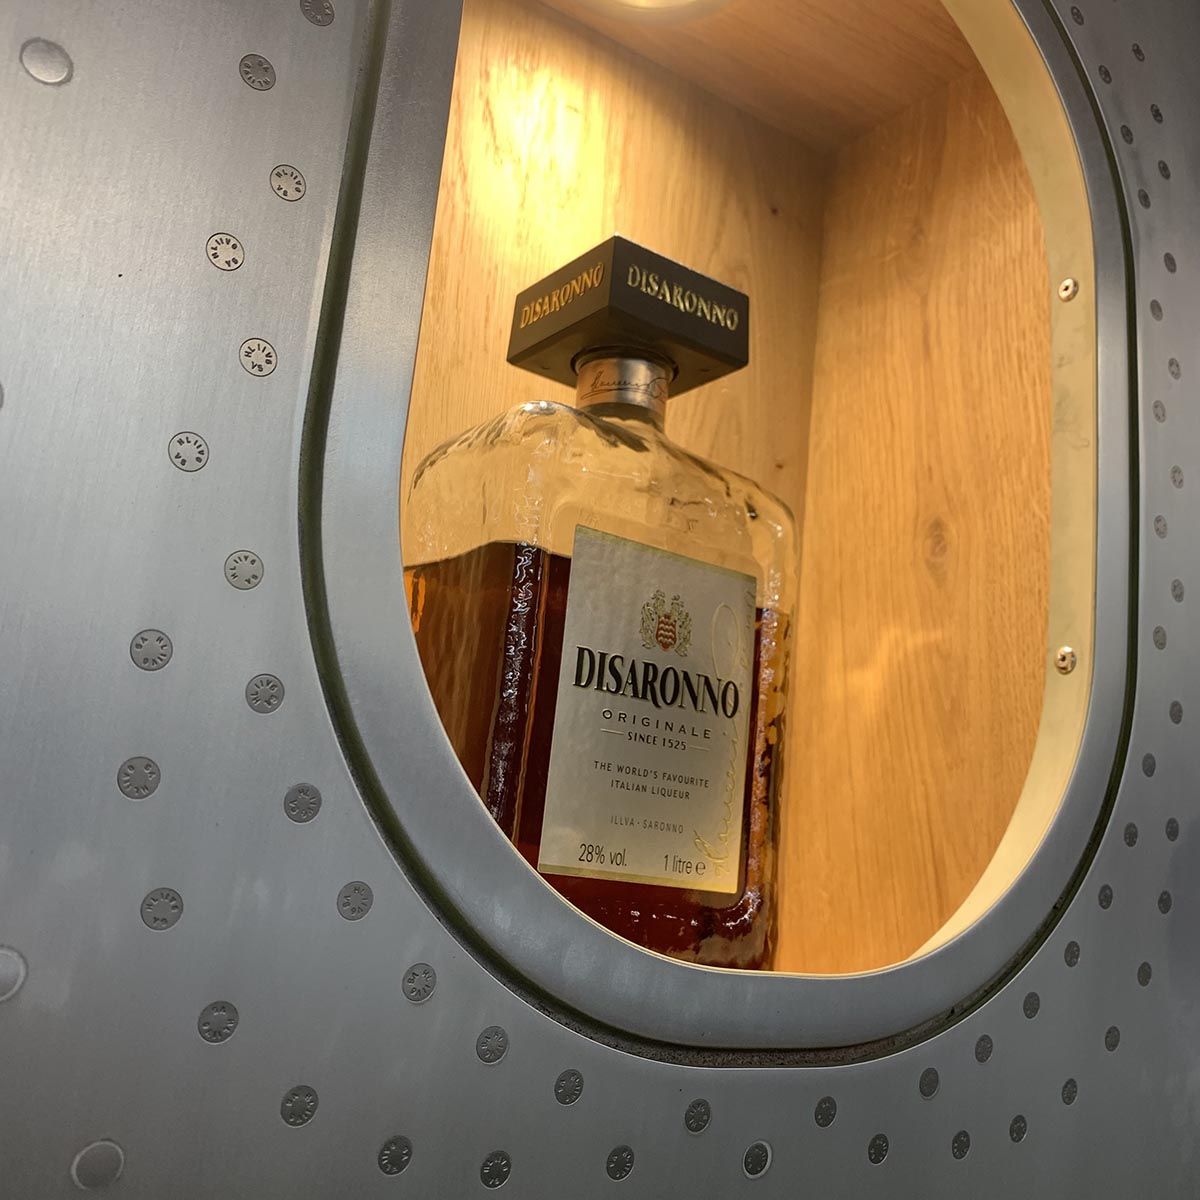 Brushed aircraft window section wall bar holding a Disaronno bottle.